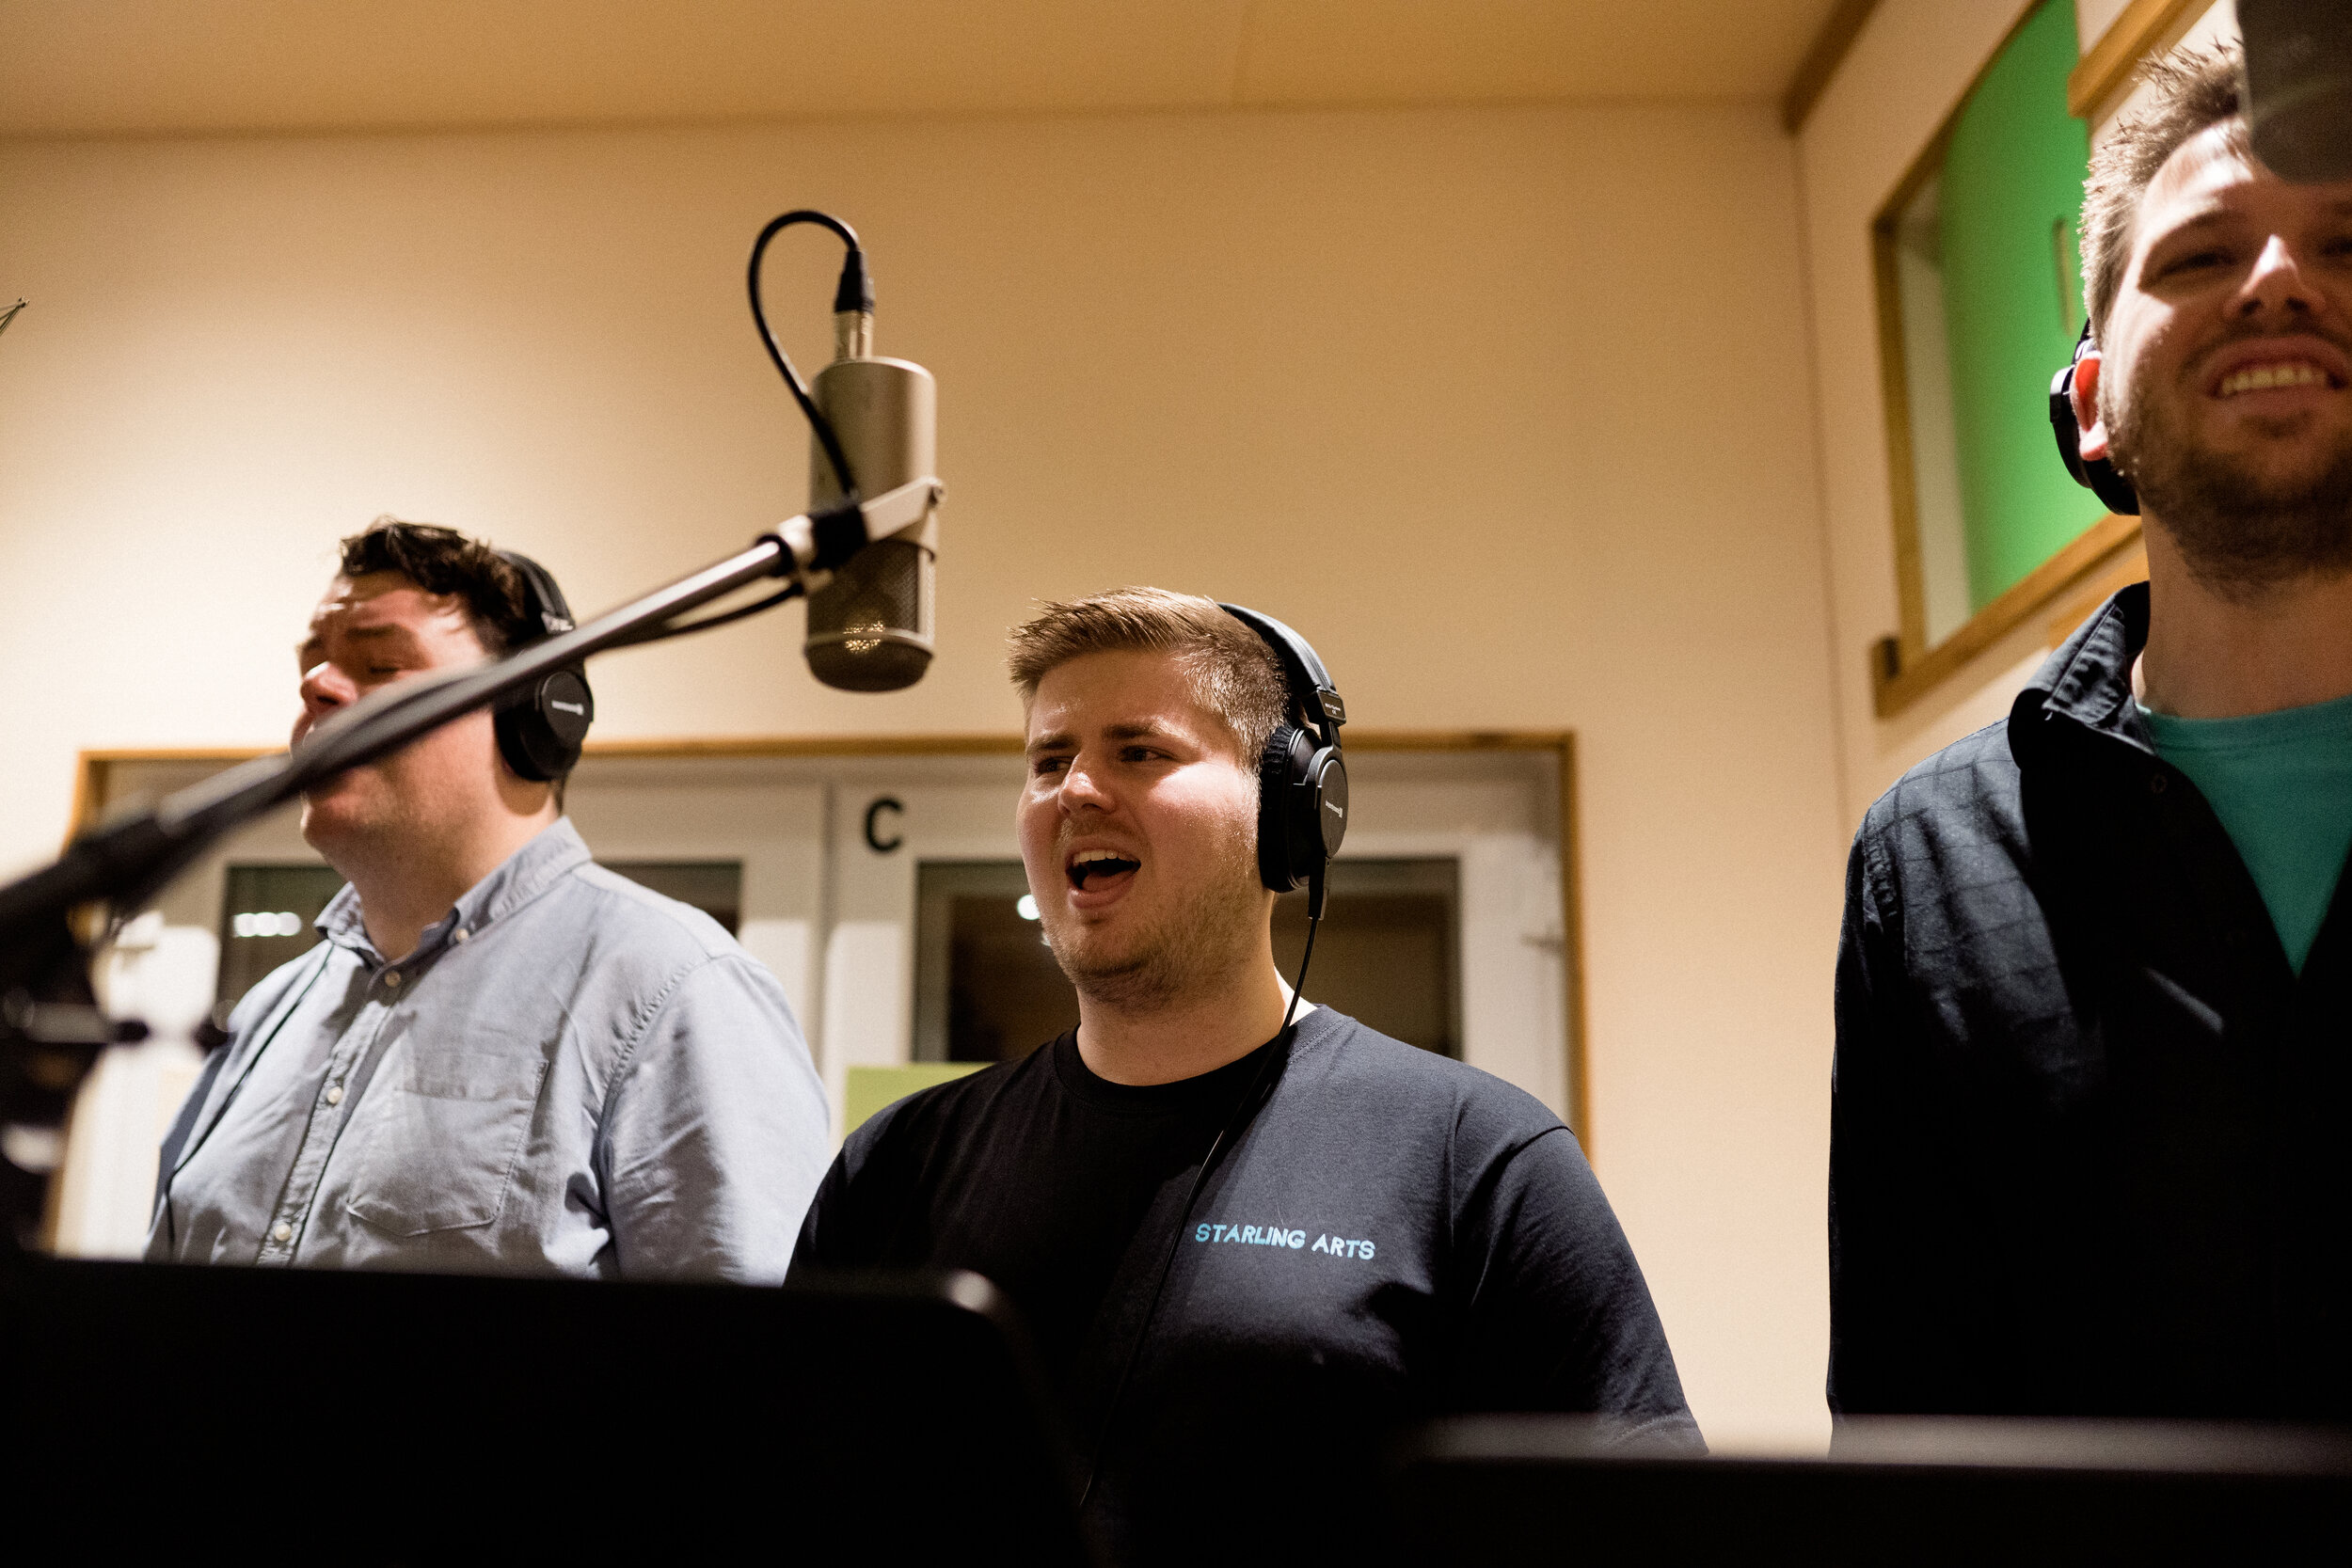 Recording singing sessions for men with Starling Arts. Photo by Florence Fox